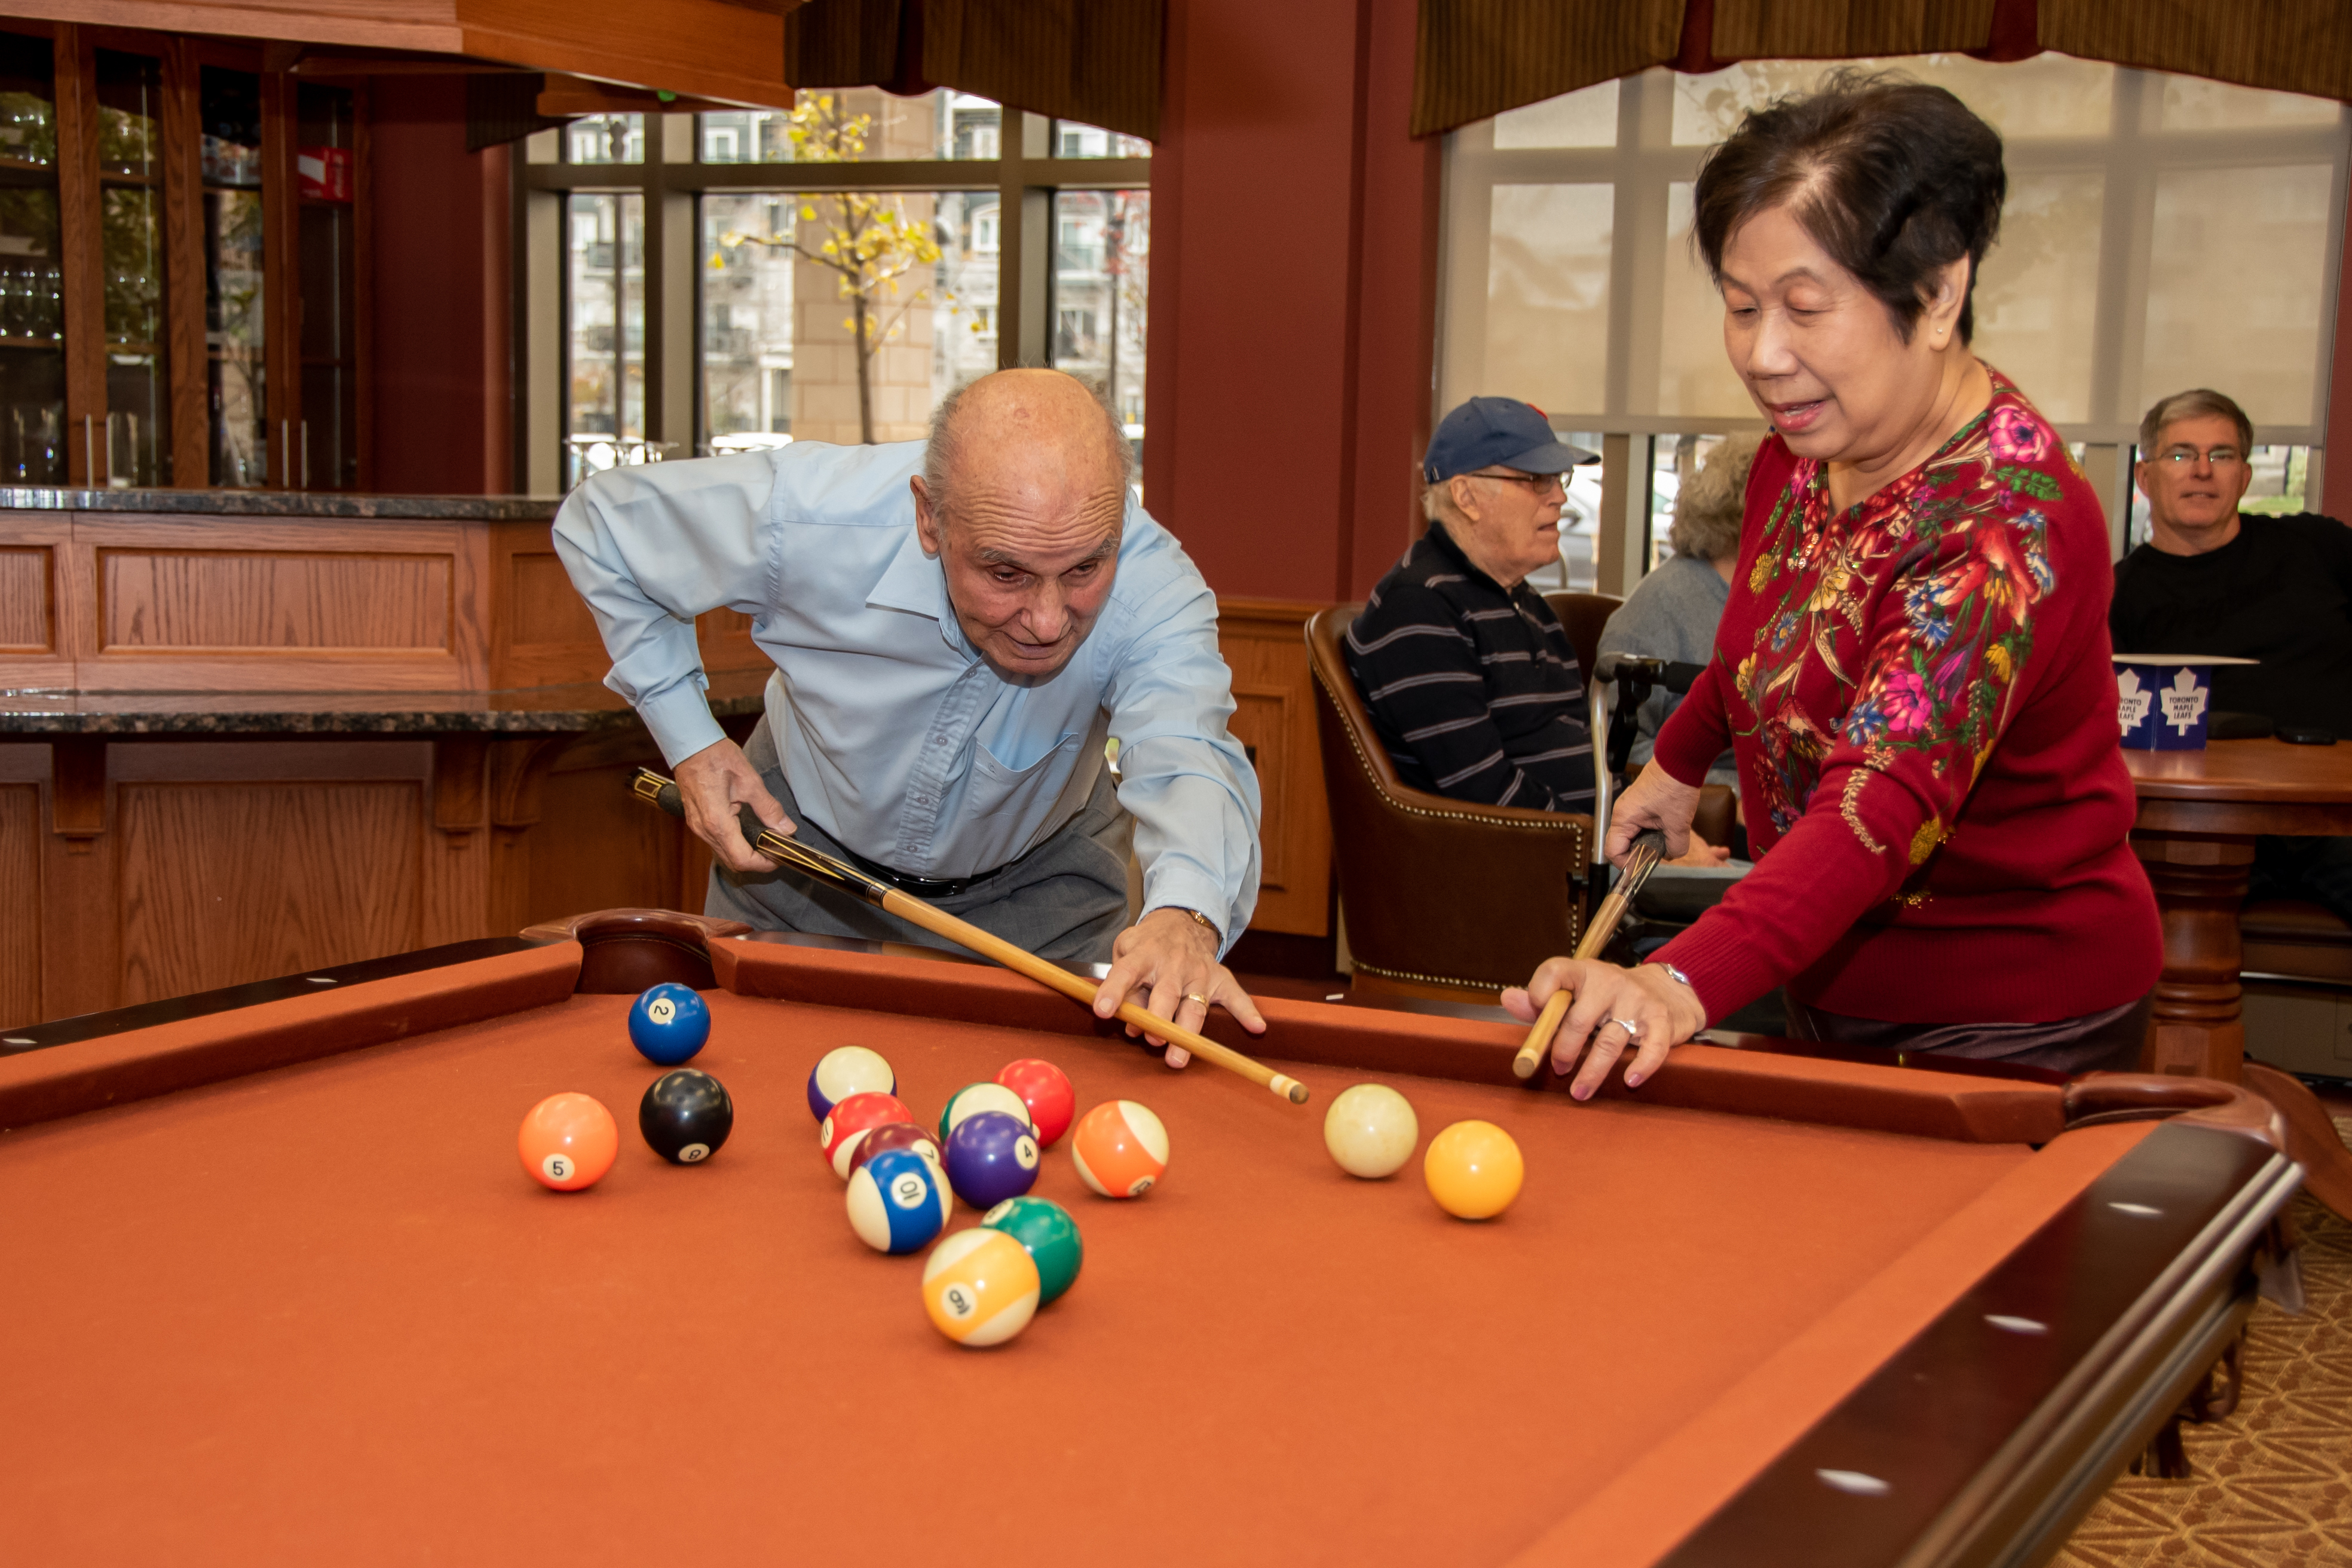 Diverse seniors share in a game of billiards in the Village social club